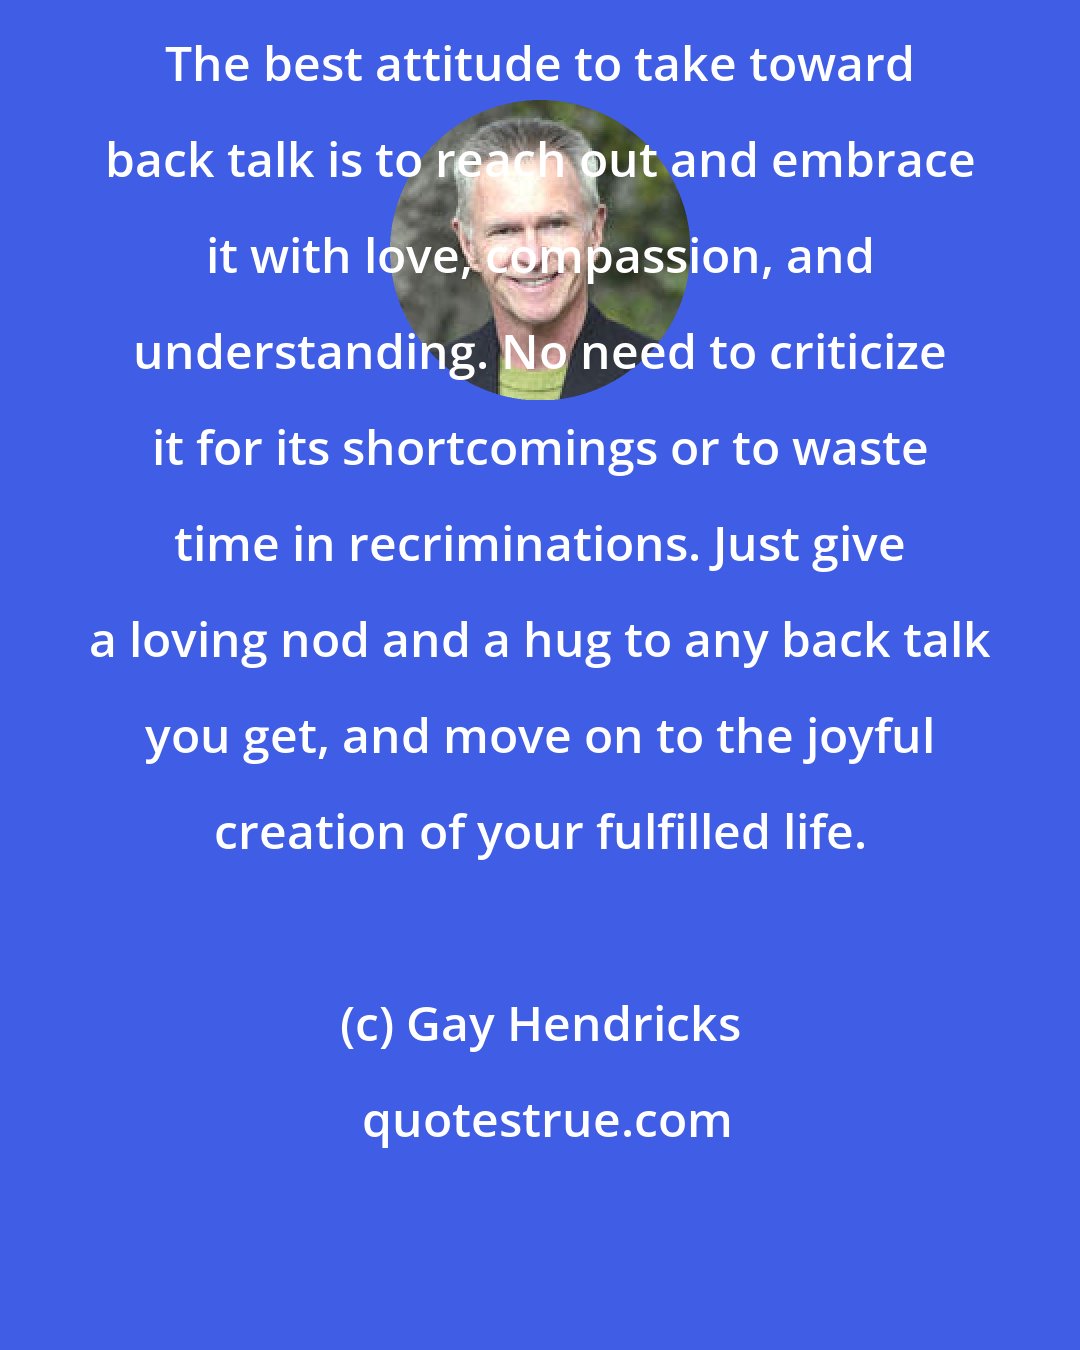 Gay Hendricks: The best attitude to take toward back talk is to reach out and embrace it with love, compassion, and understanding. No need to criticize it for its shortcomings or to waste time in recriminations. Just give a loving nod and a hug to any back talk you get, and move on to the joyful creation of your fulfilled life.